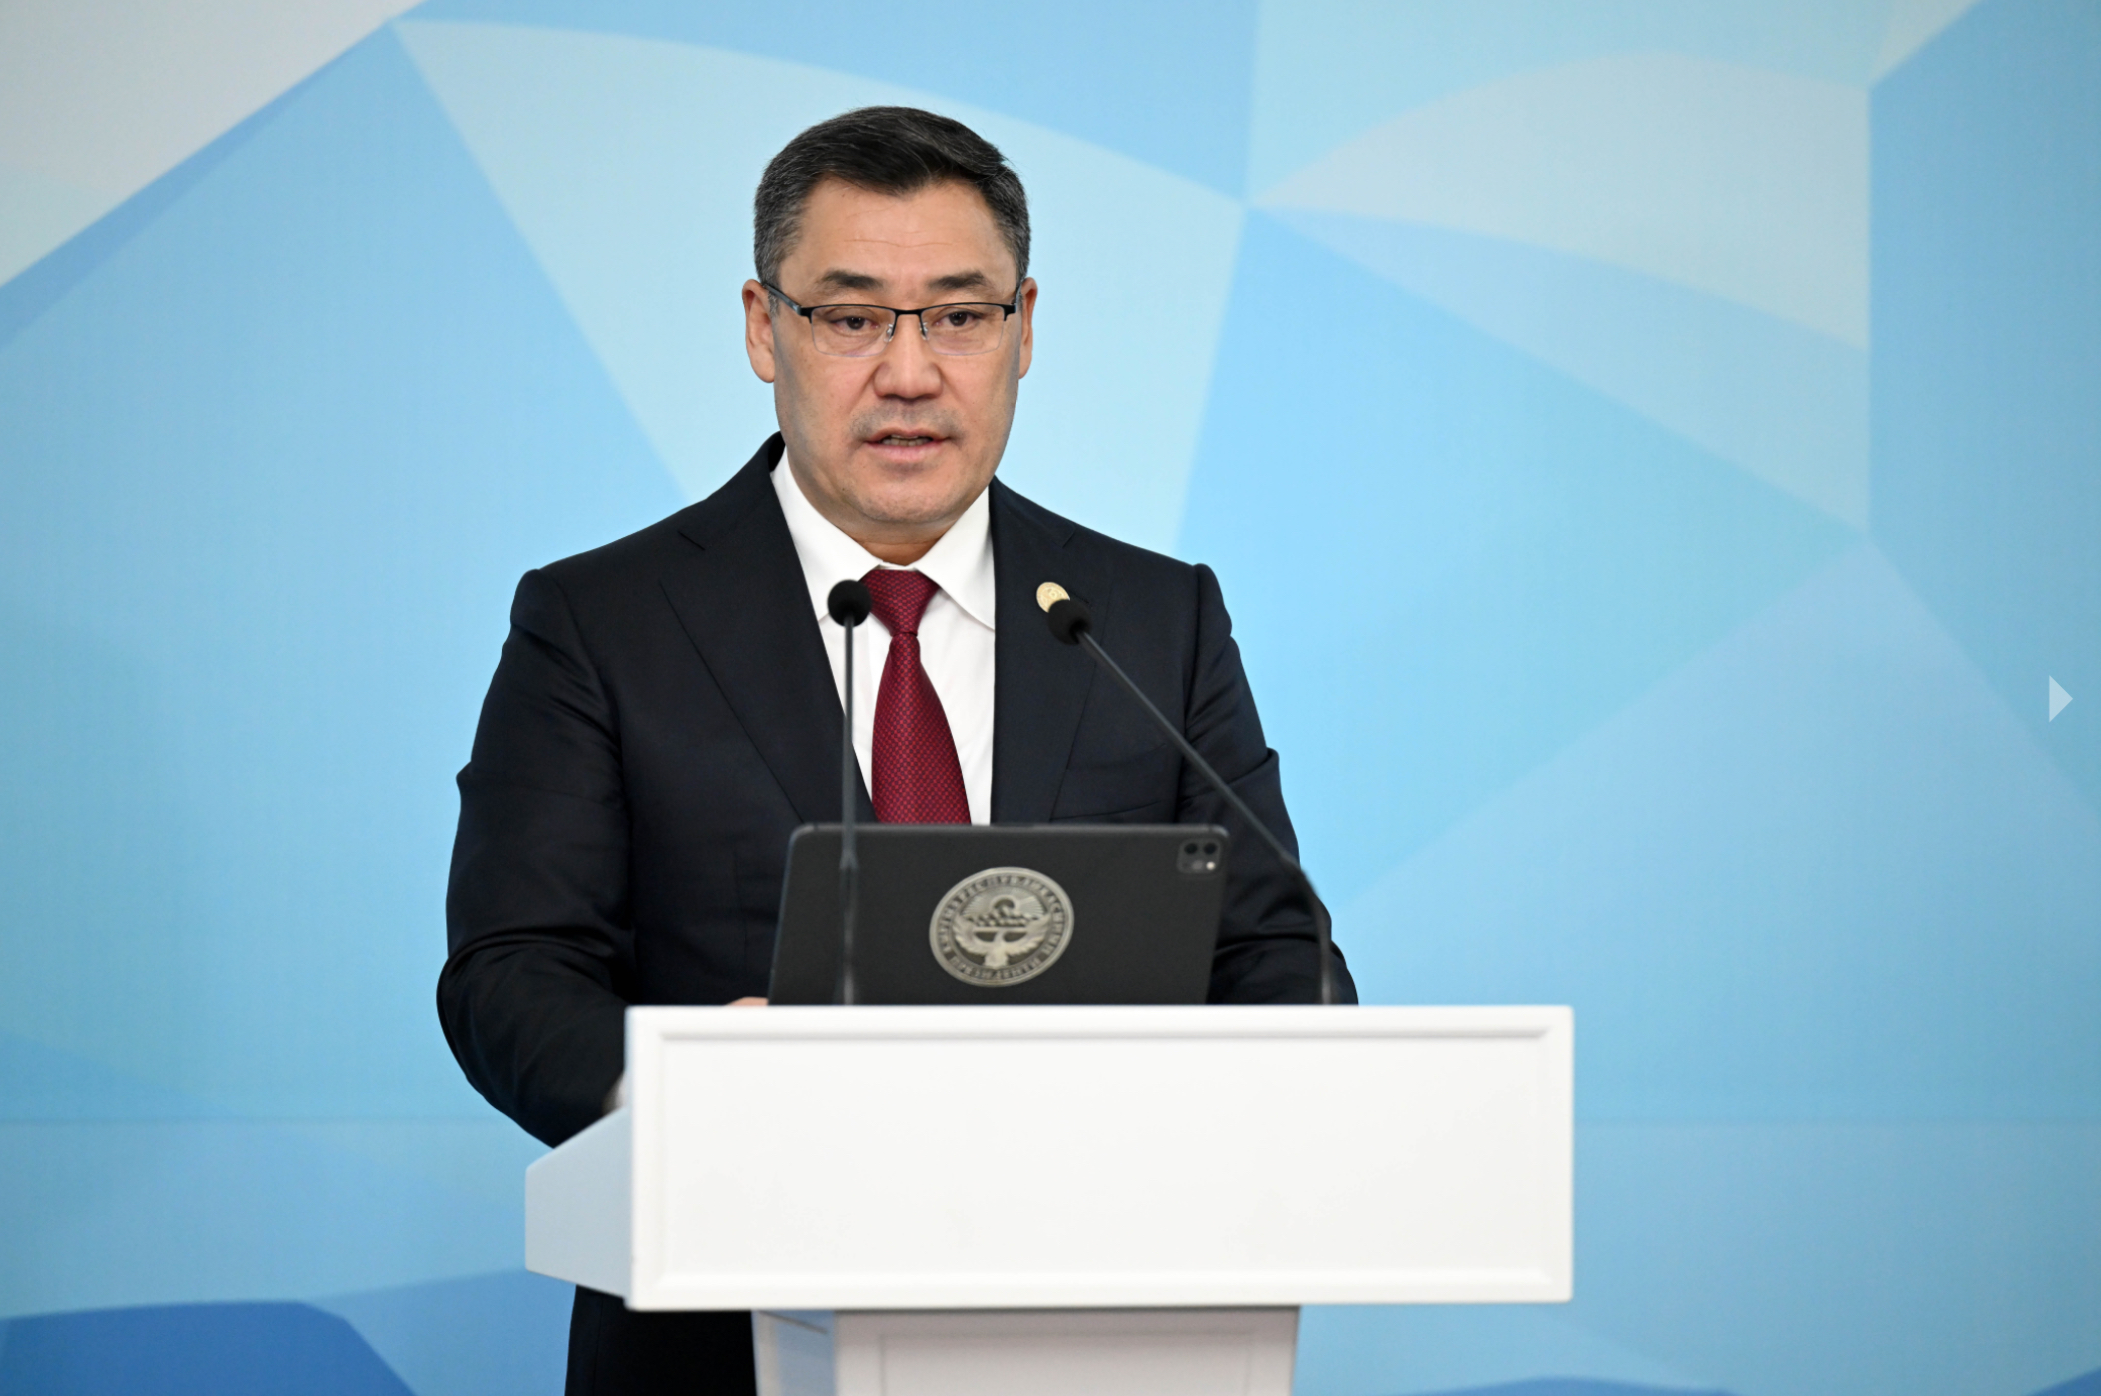  President Sadyr Japarov highlights key achievements at conclusion of CIS Heads of State meeting